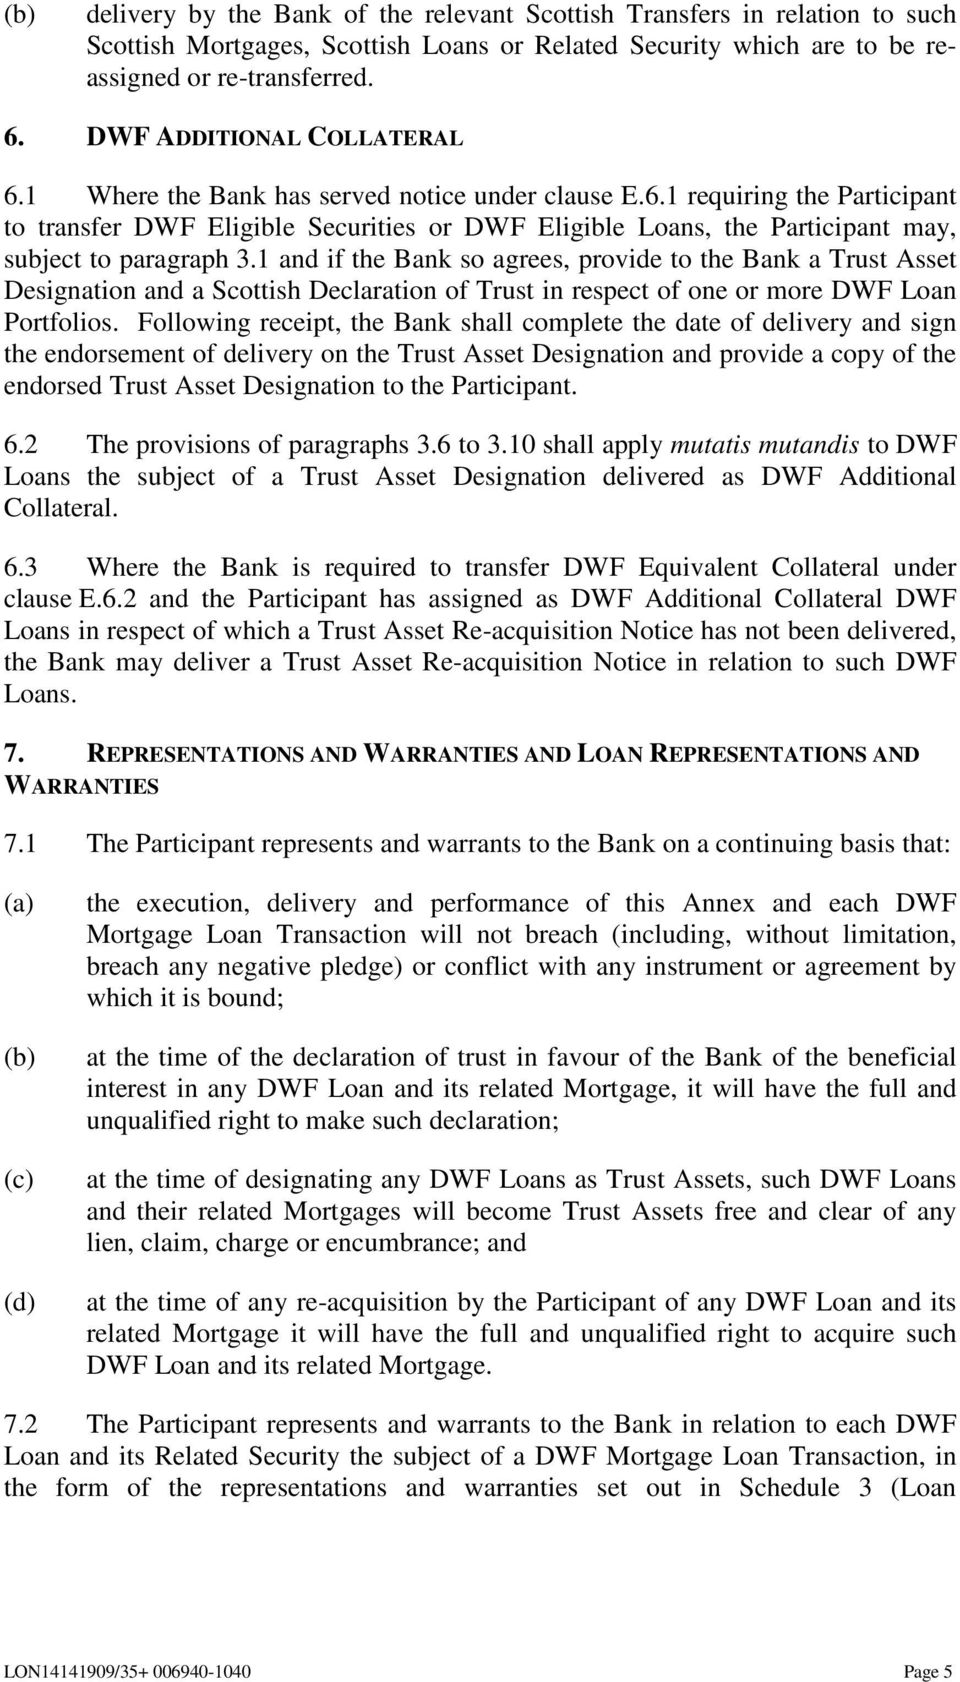 1 and if the Bank so agrees, provide to the Bank a Trust Asset Designation and a Scottish Declaration of Trust in respect of one or more DWF Loan Portfolios.